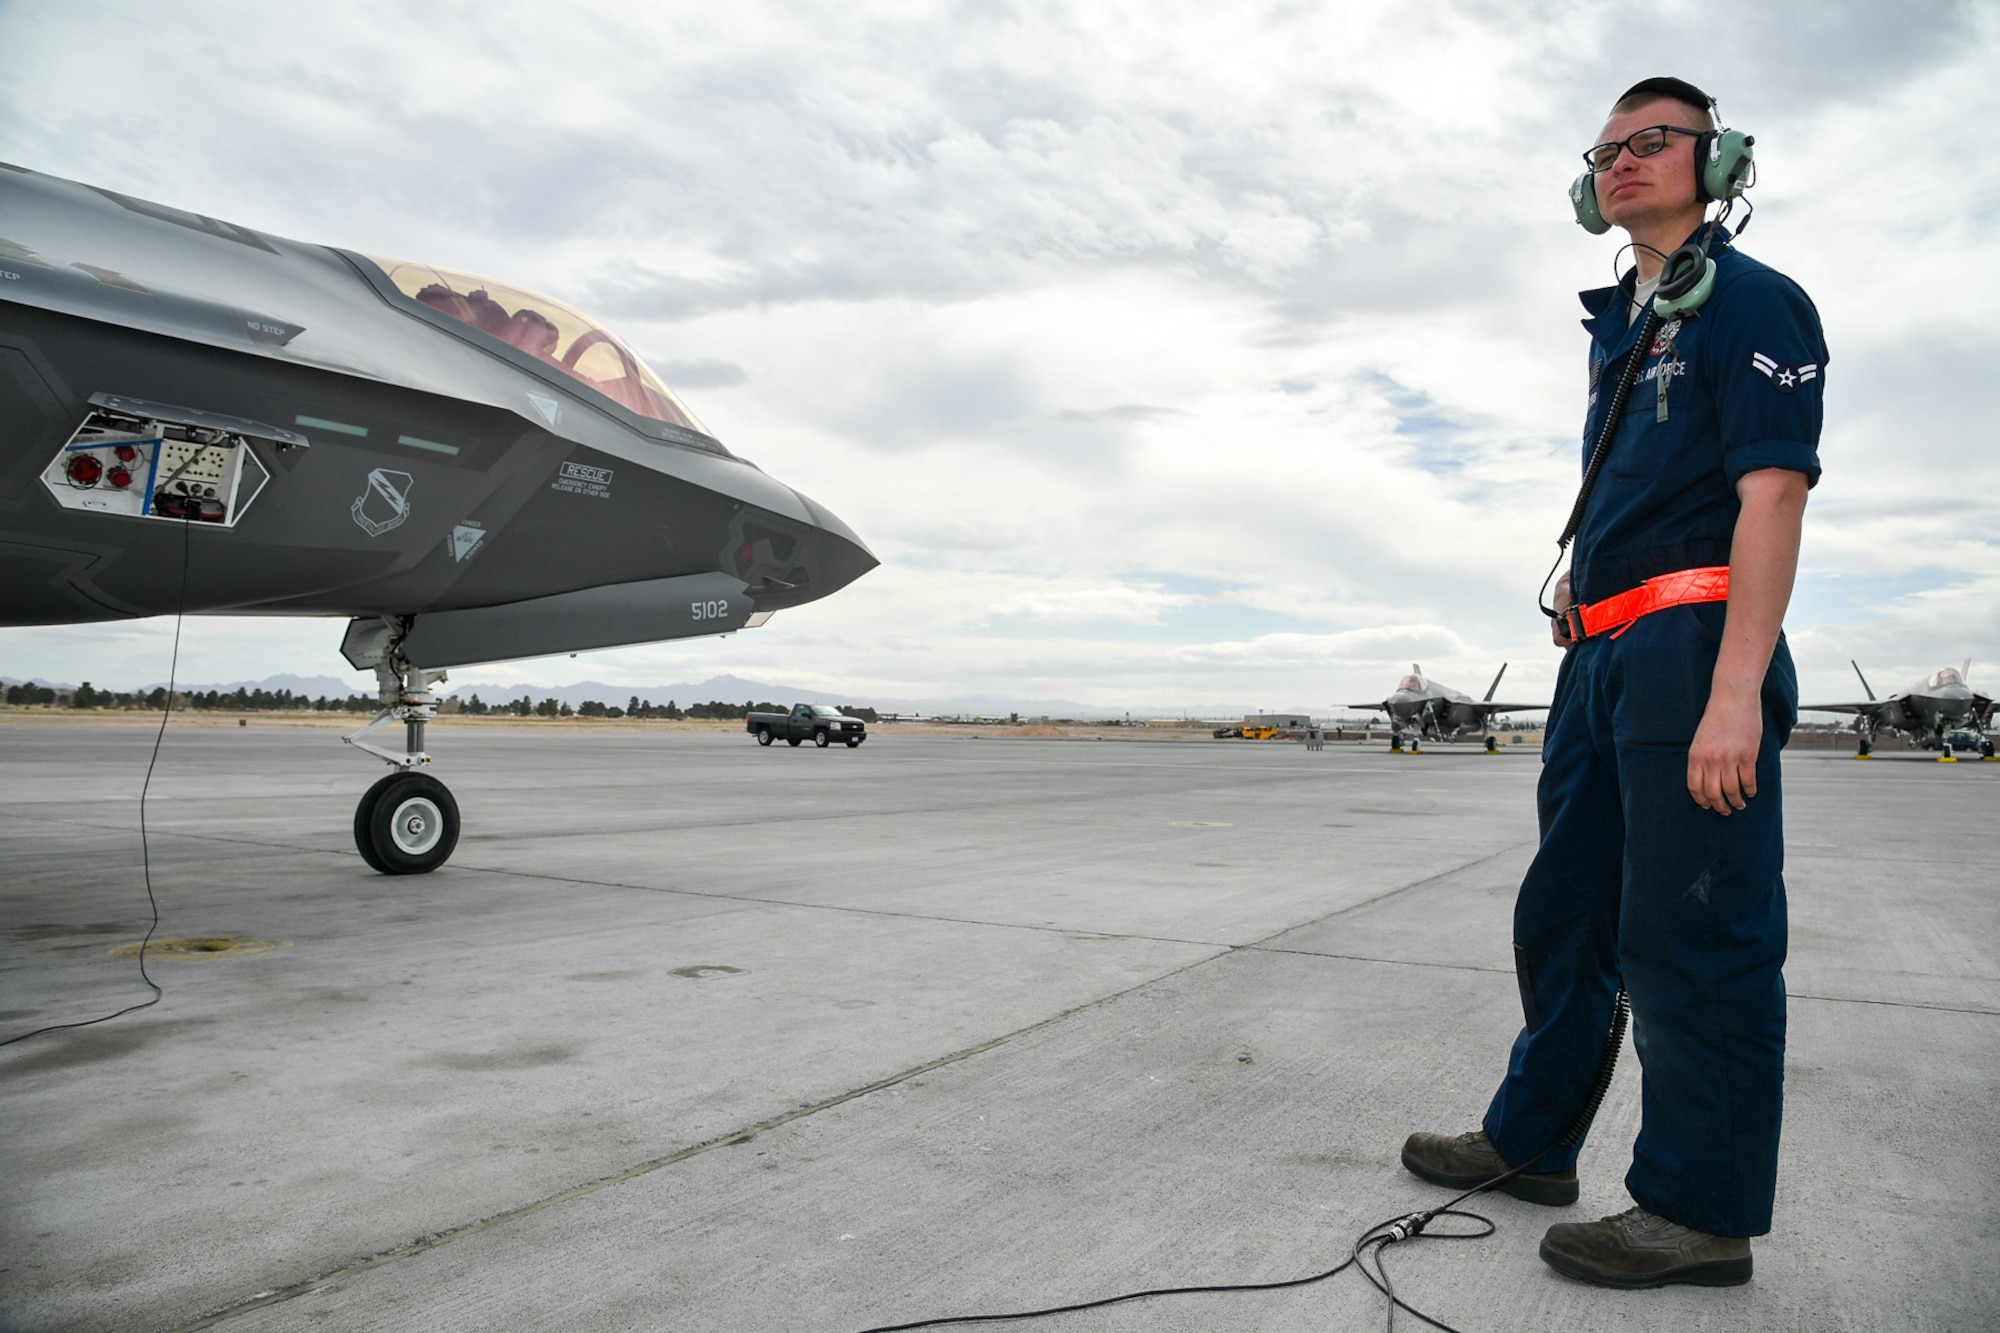 Airman 1st Class Nathan Kosters, a crew chief with the 34th Aircraft Maintenance Unit, prepares to launch an F-35A Lightning II aircraft during Red Flag 17-1 at Nellis Air Force Base, Nevada, Feb. 7, 2017. (U.S. Air Force photo/R. Nial Bradshaw)